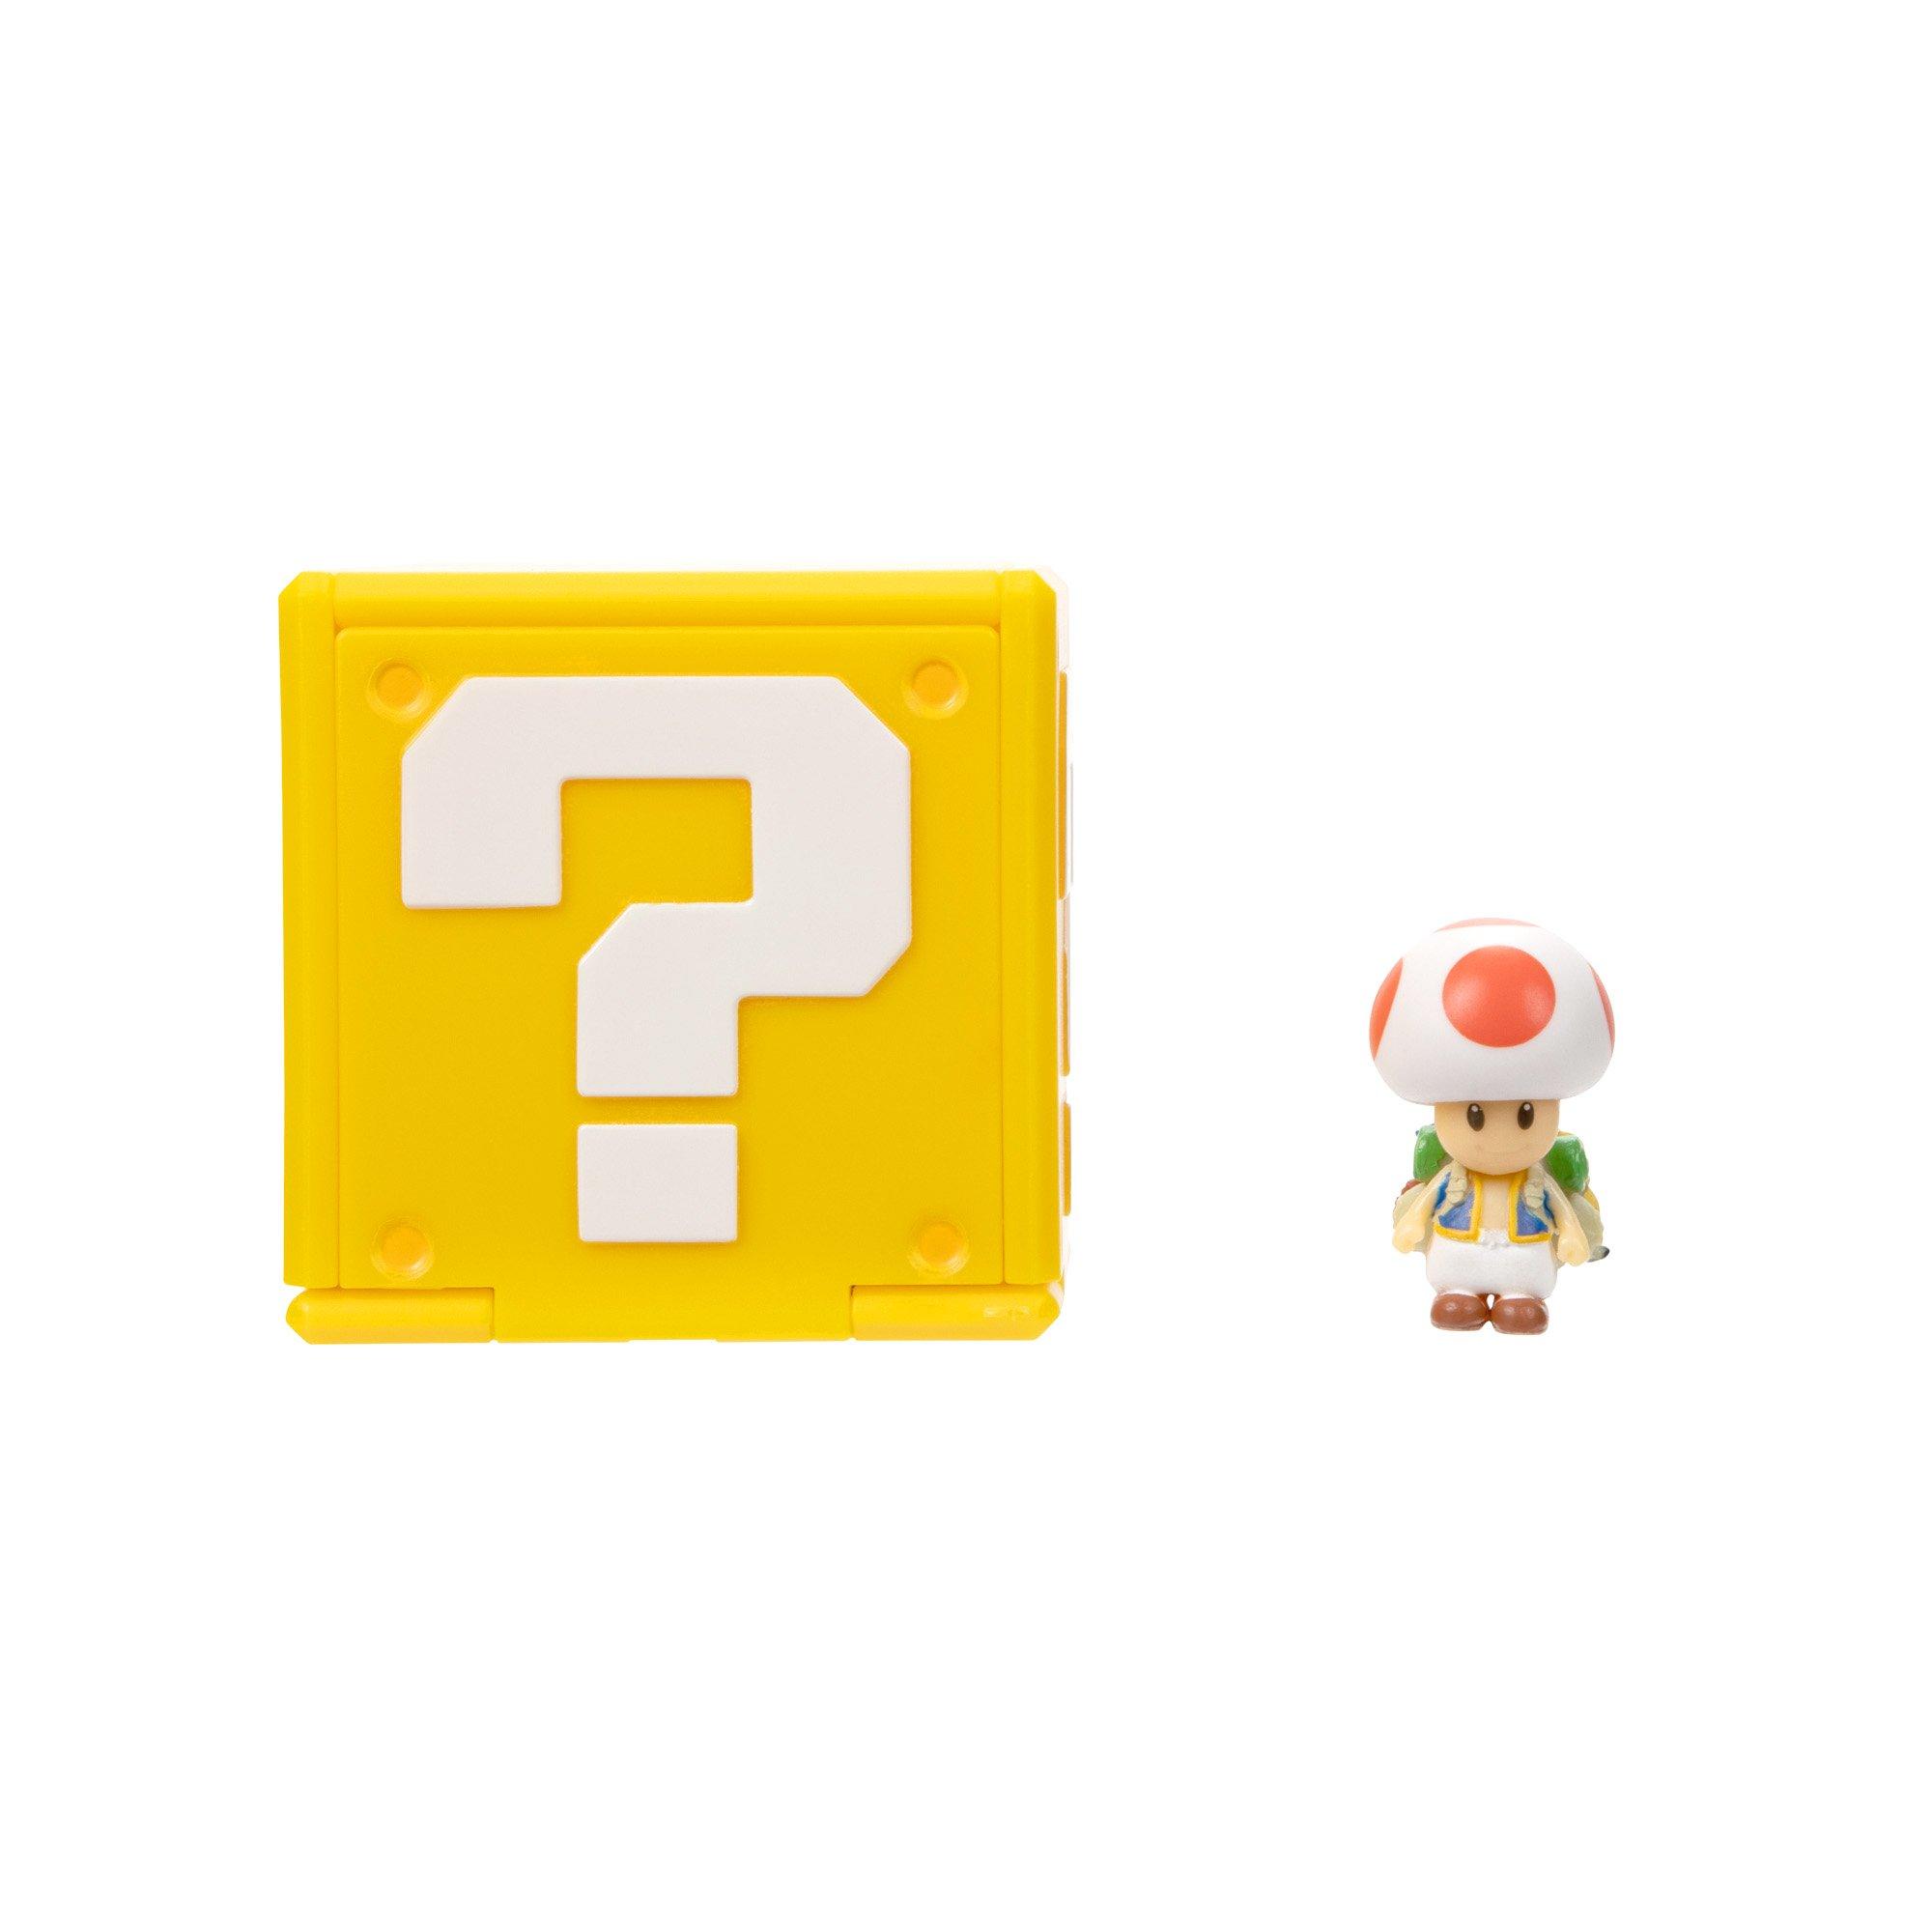 A Jakks Pacific Super Mario 4” Cat Toad has reportedly been listed